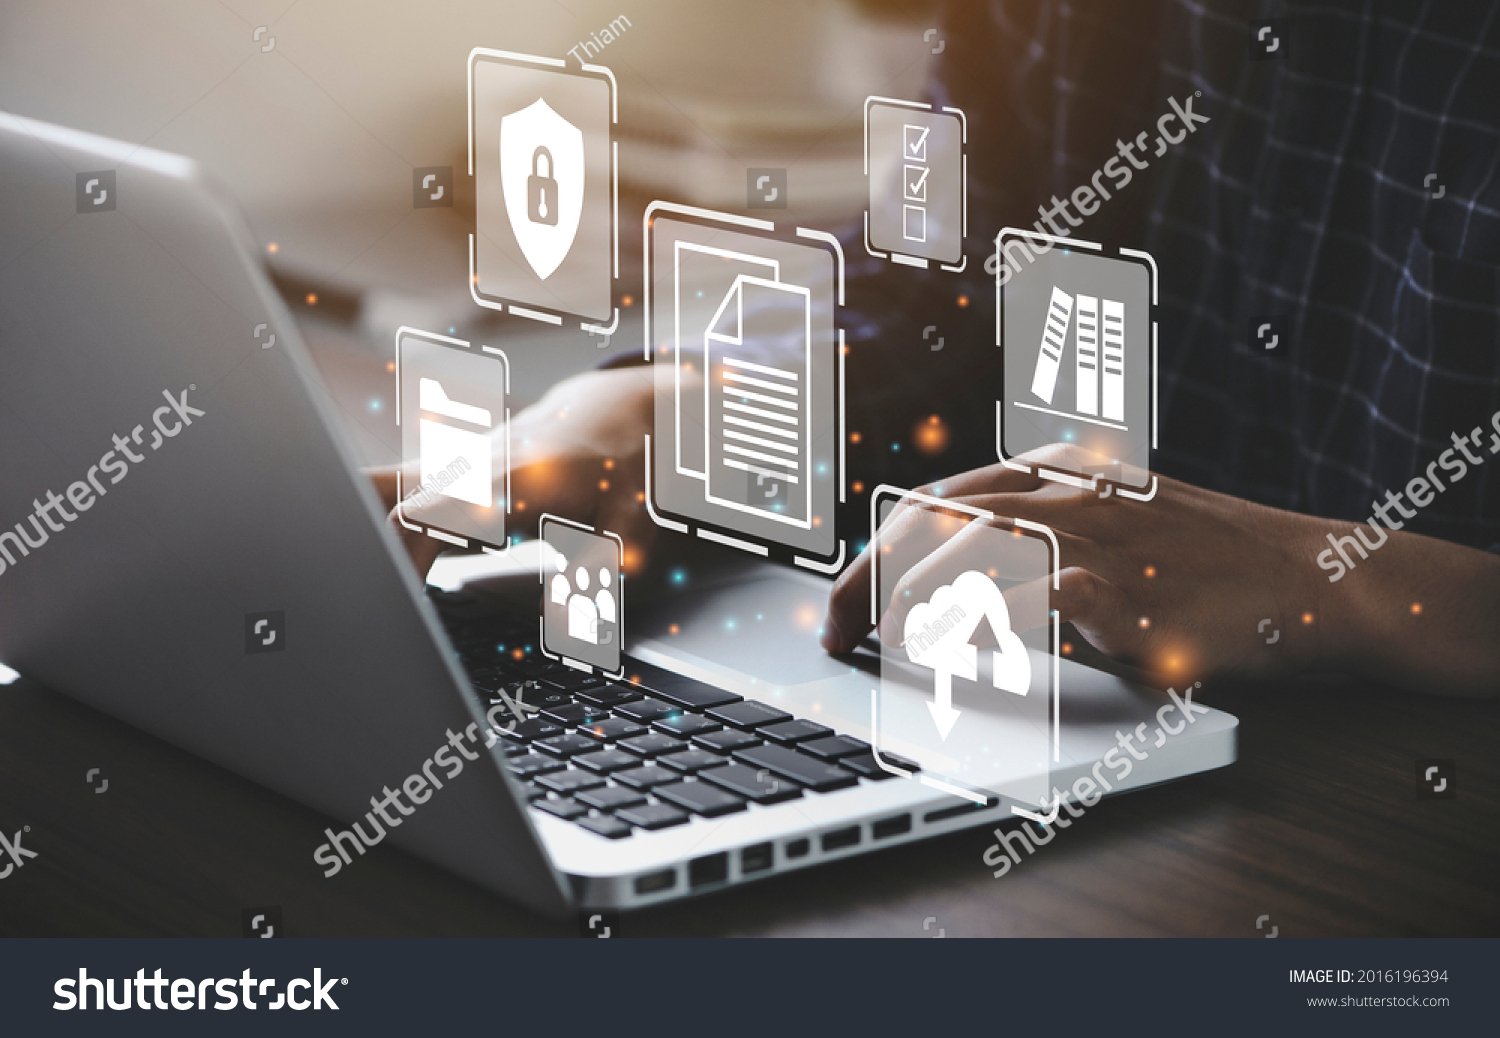 Businessman using a computer to document management concept, online documentation database and digital file storage system or software, records keeping, database technology, file access, doc sharing. #2016196394